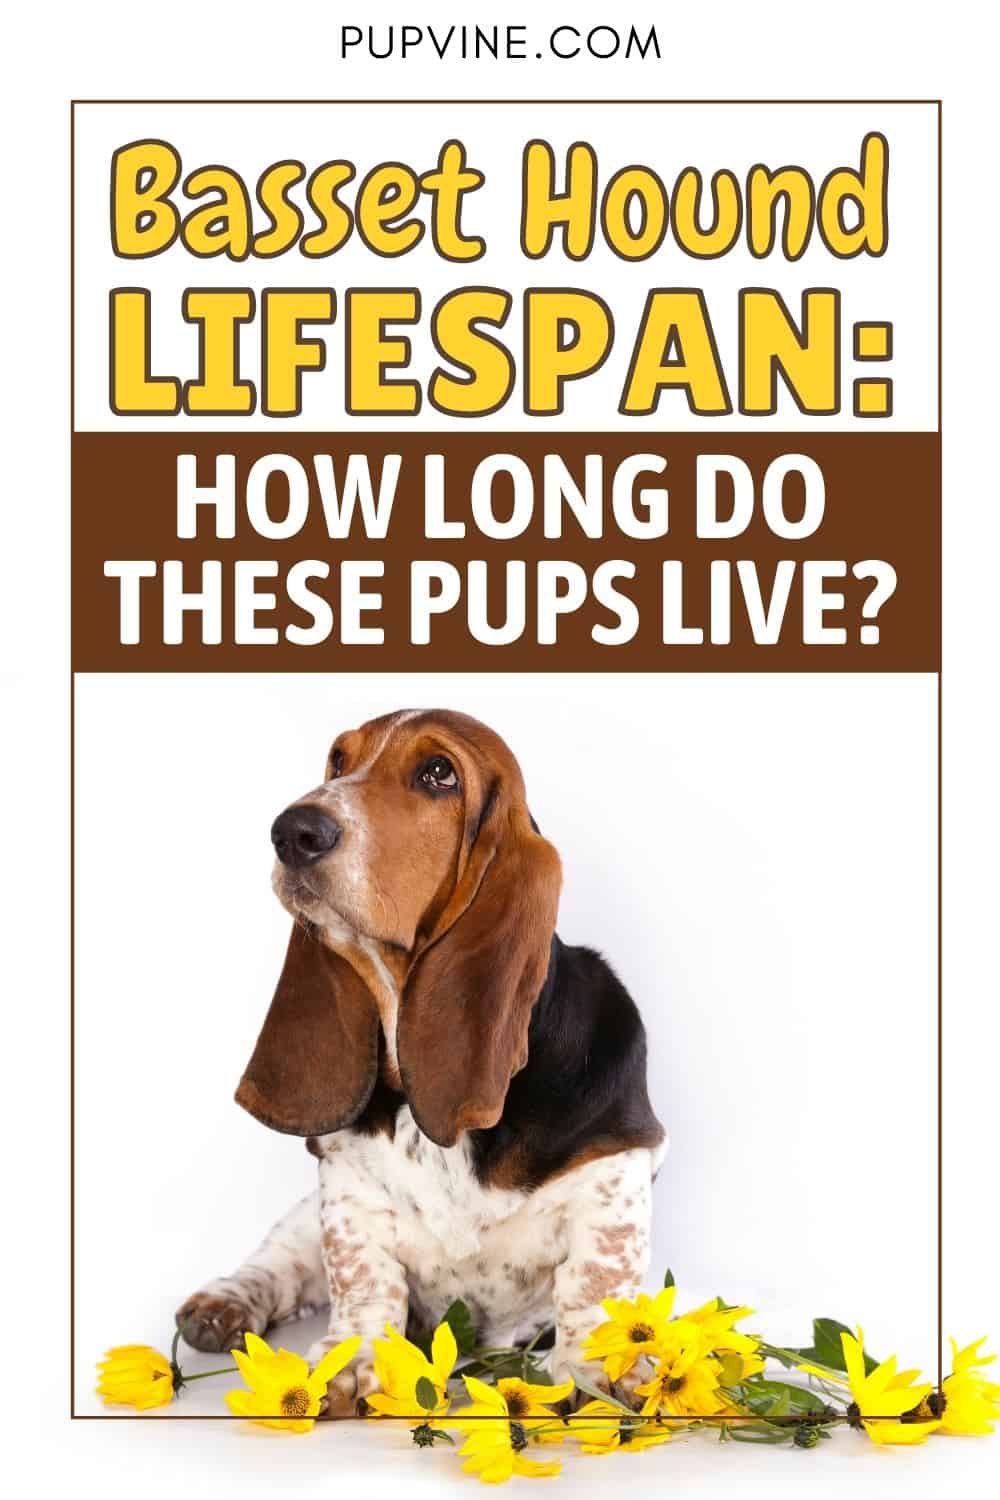 Basset Hound Lifespan How Long Do These Pups Live